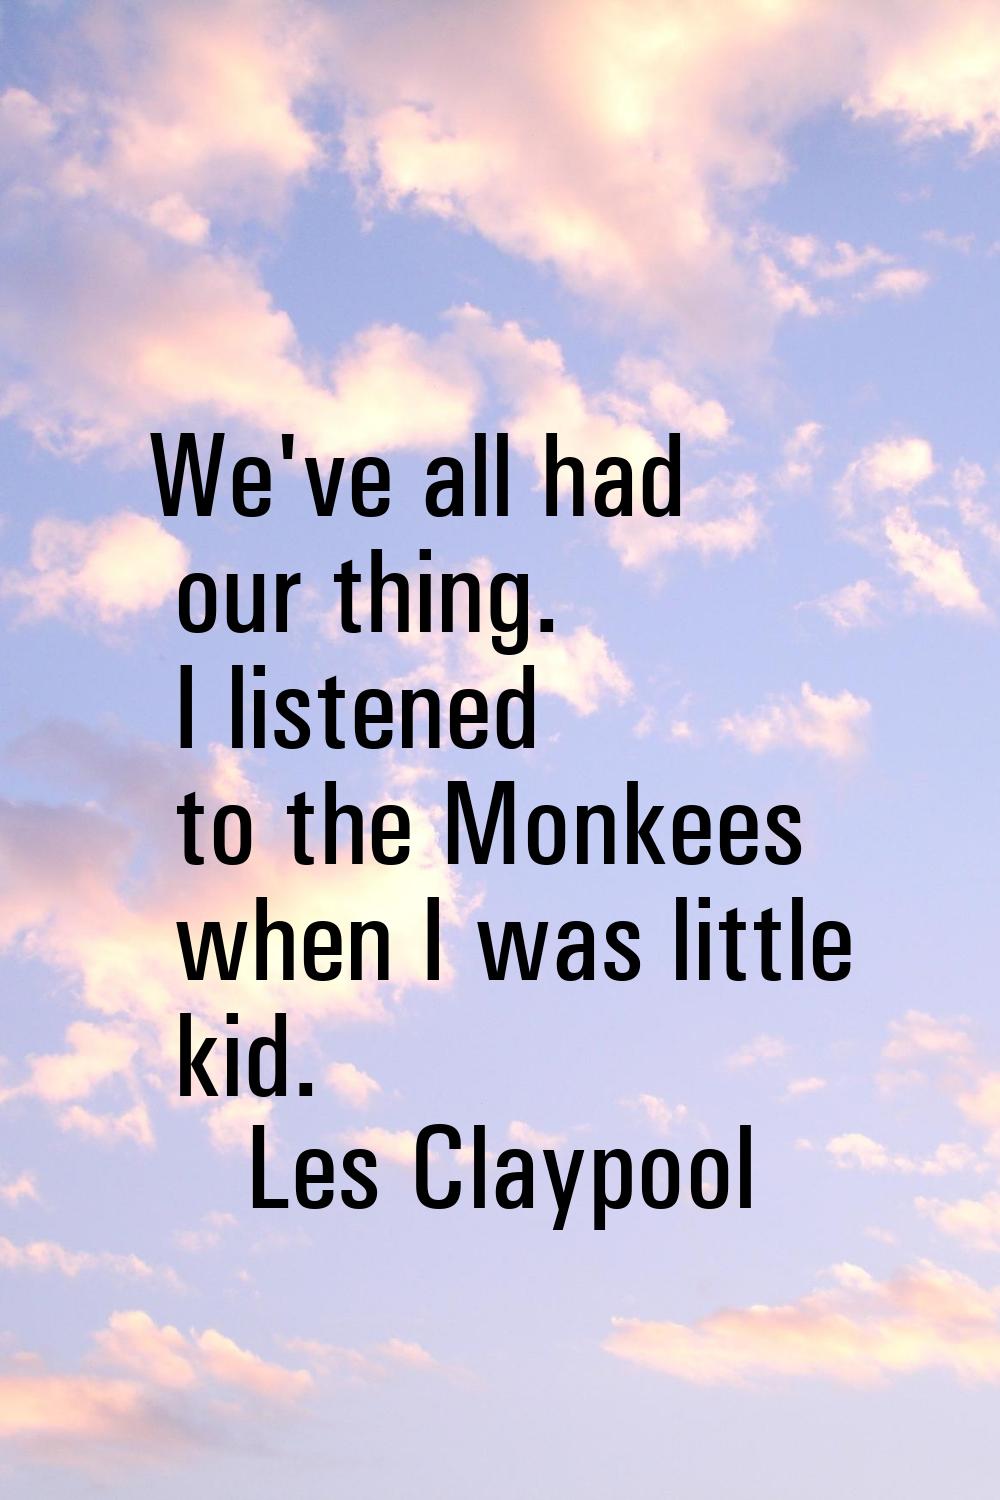 We've all had our thing. I listened to the Monkees when I was little kid.